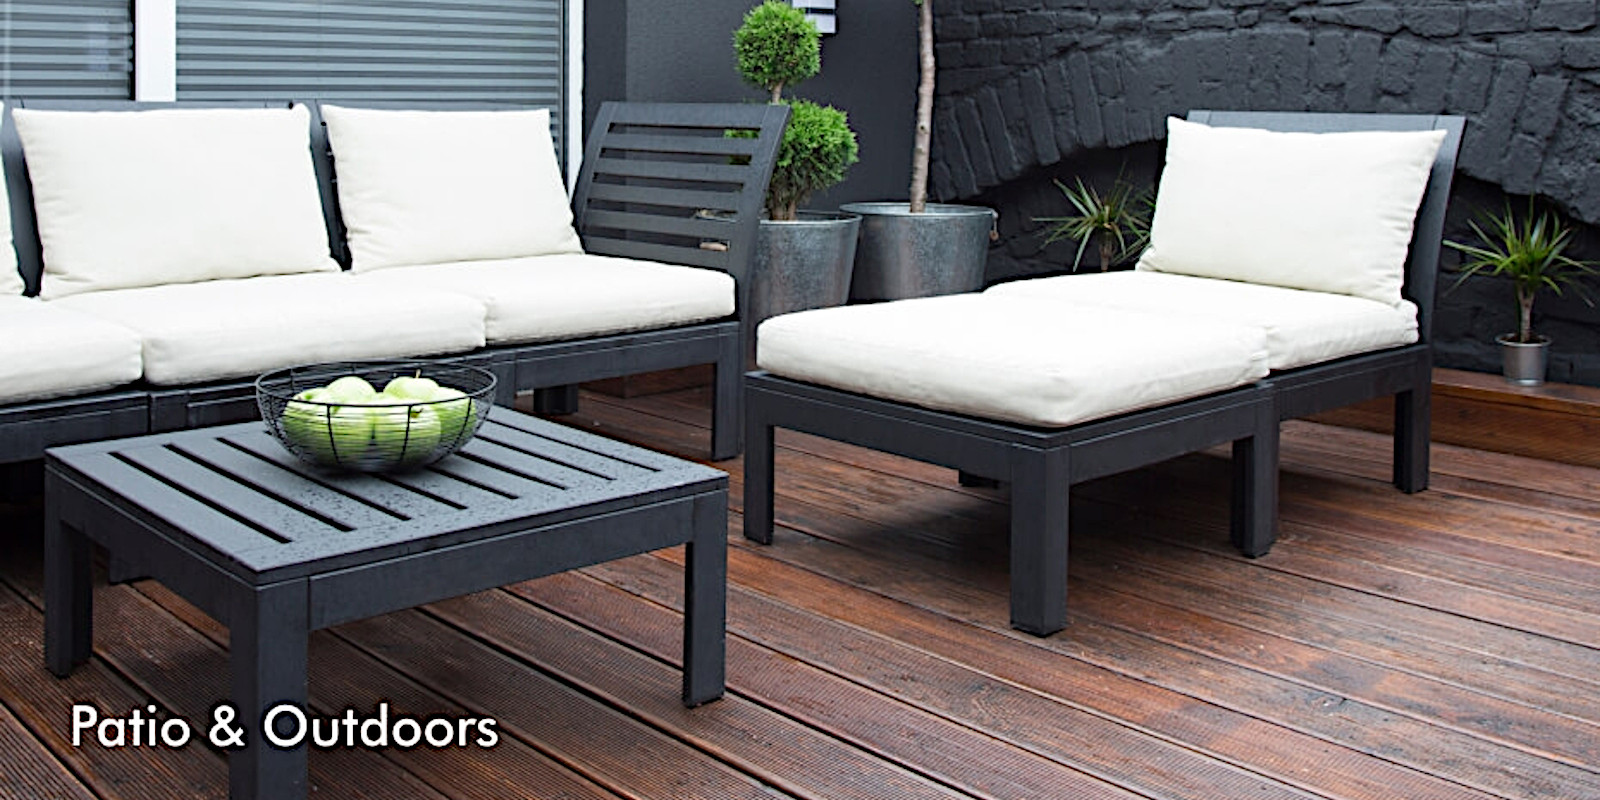 Patio furniture popularly priced